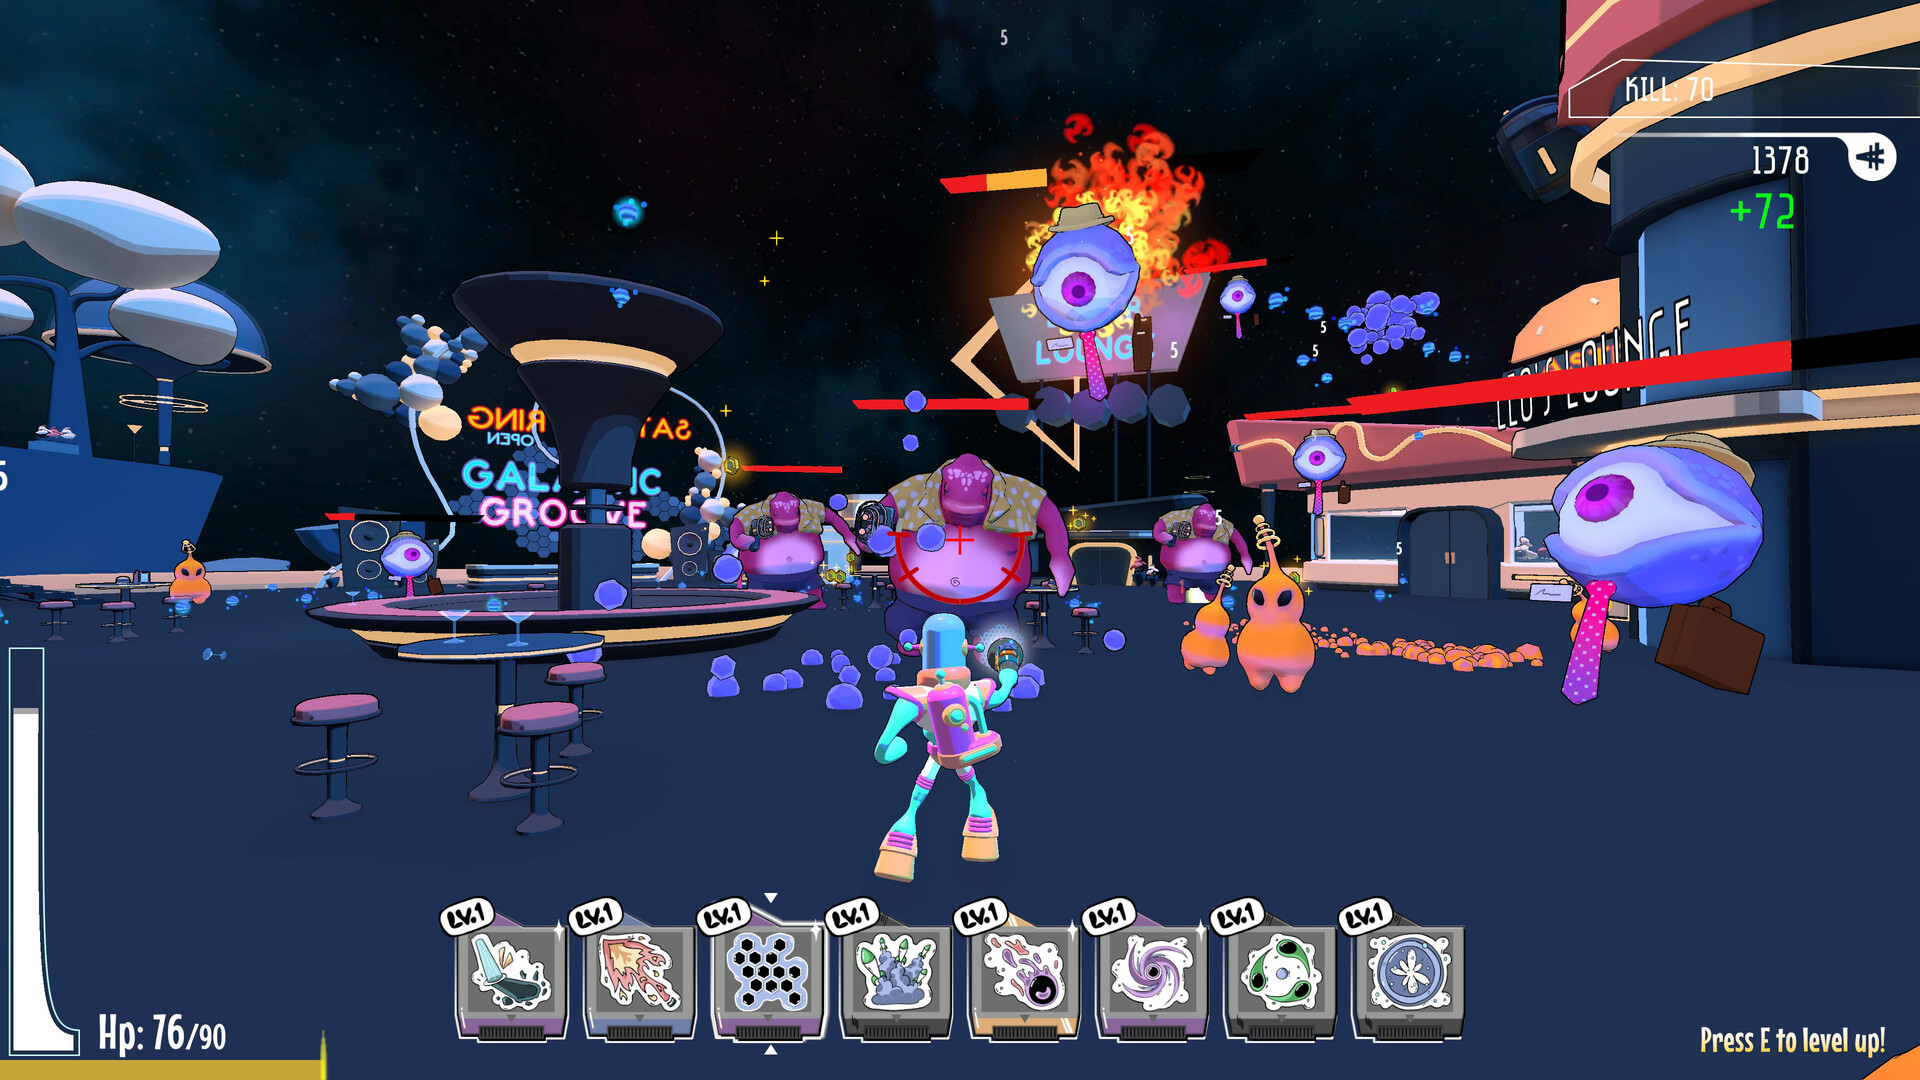 Image is from game CHUTNEY: Space Survivor. A player is fighting out alien enemies with omni-gun.